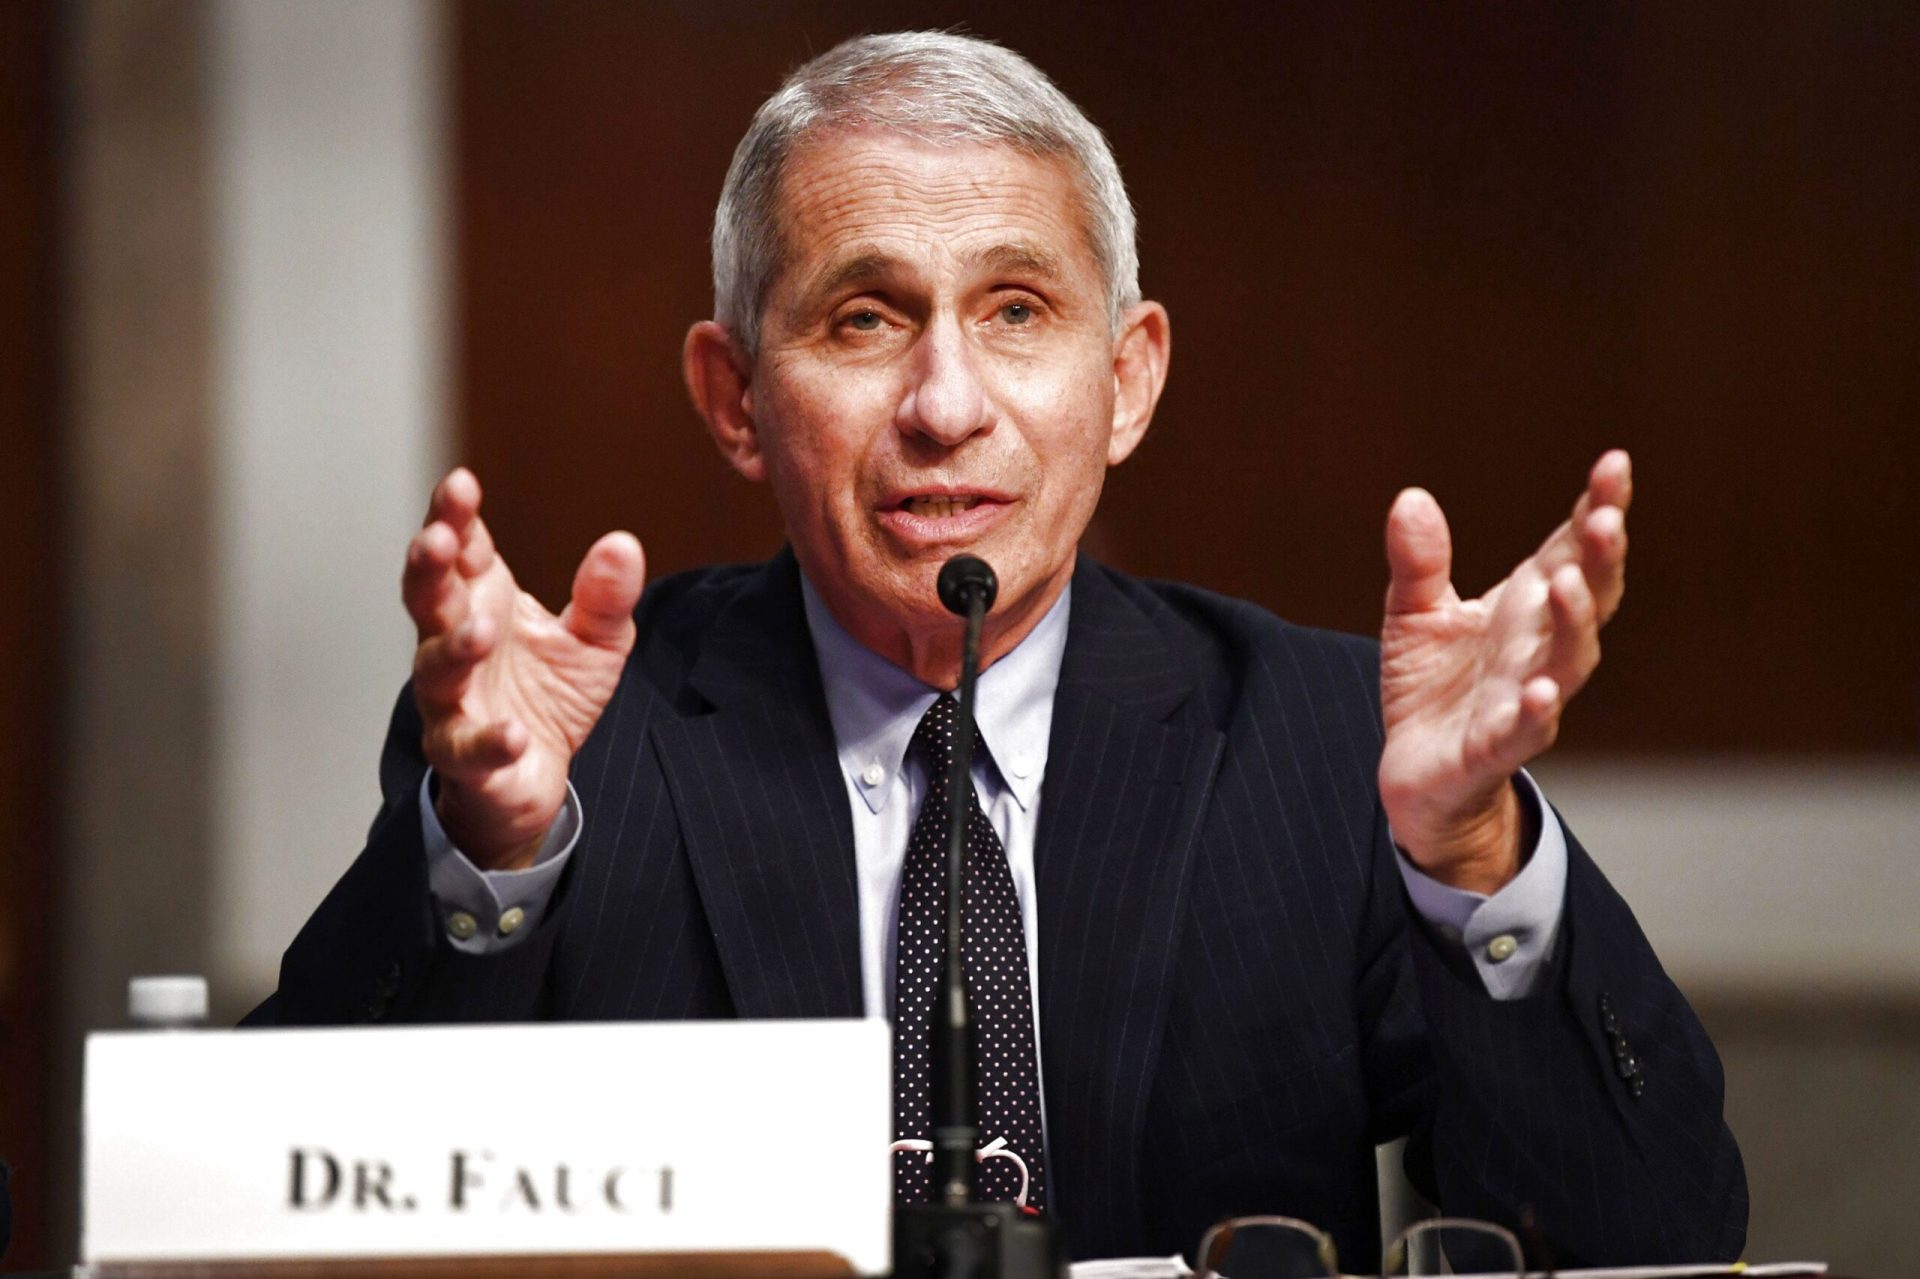 Fauci: The U.S. fights pandemic in the wrong direction and will experience more pain if it does not change